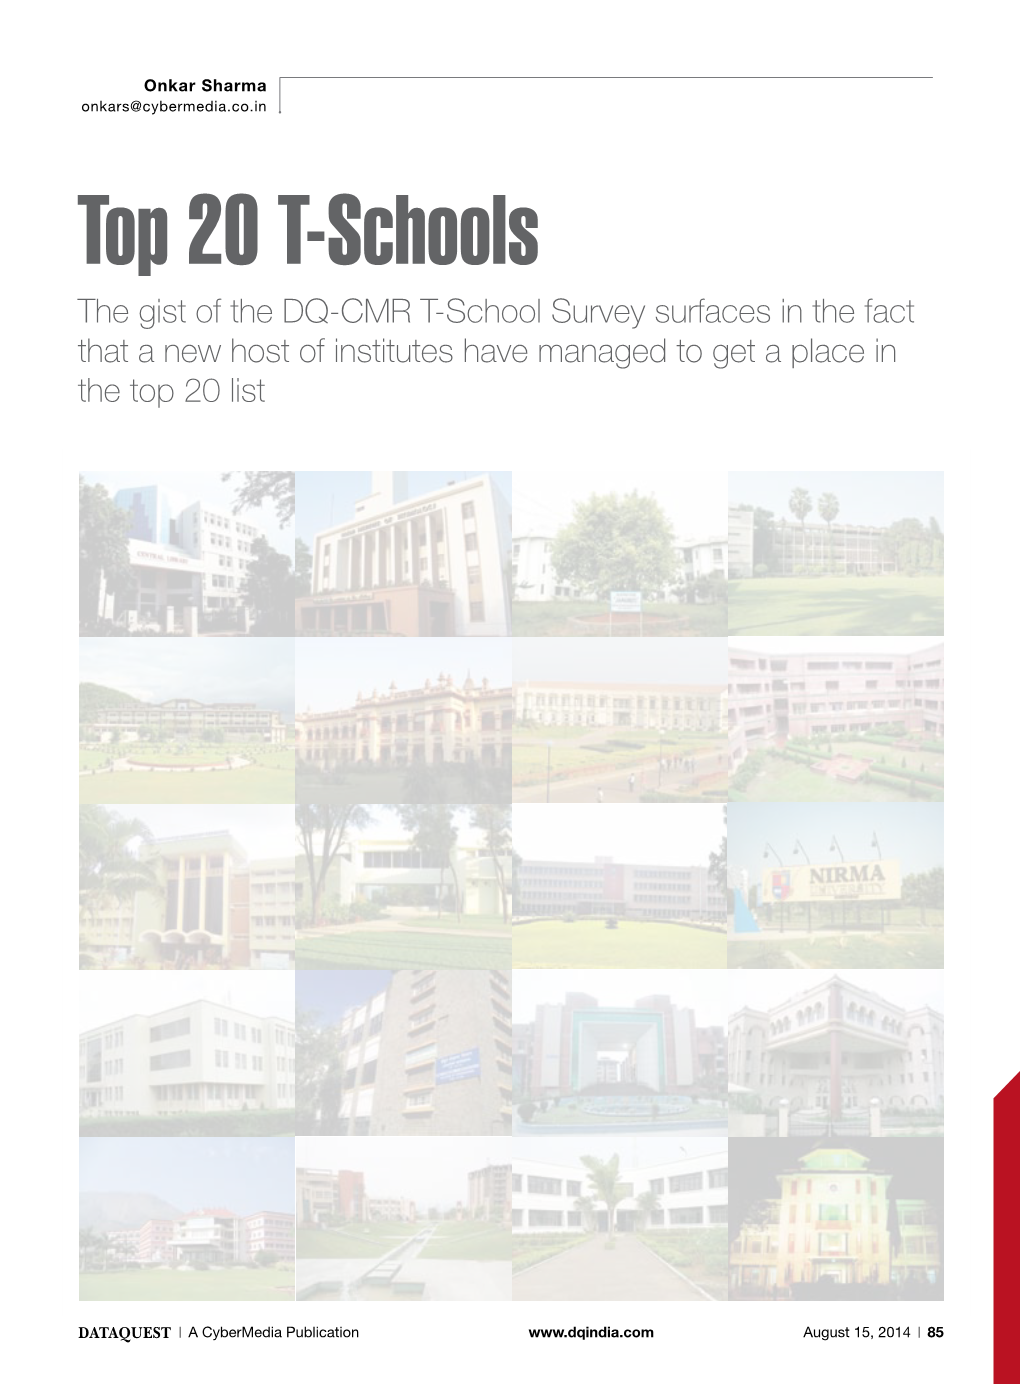 Top 20 T-Schools the Gist of the DQ-CMR T-School Survey Surfaces in the Fact That a New Host of Institutes Have Managed to Get a Place in the Top 20 List